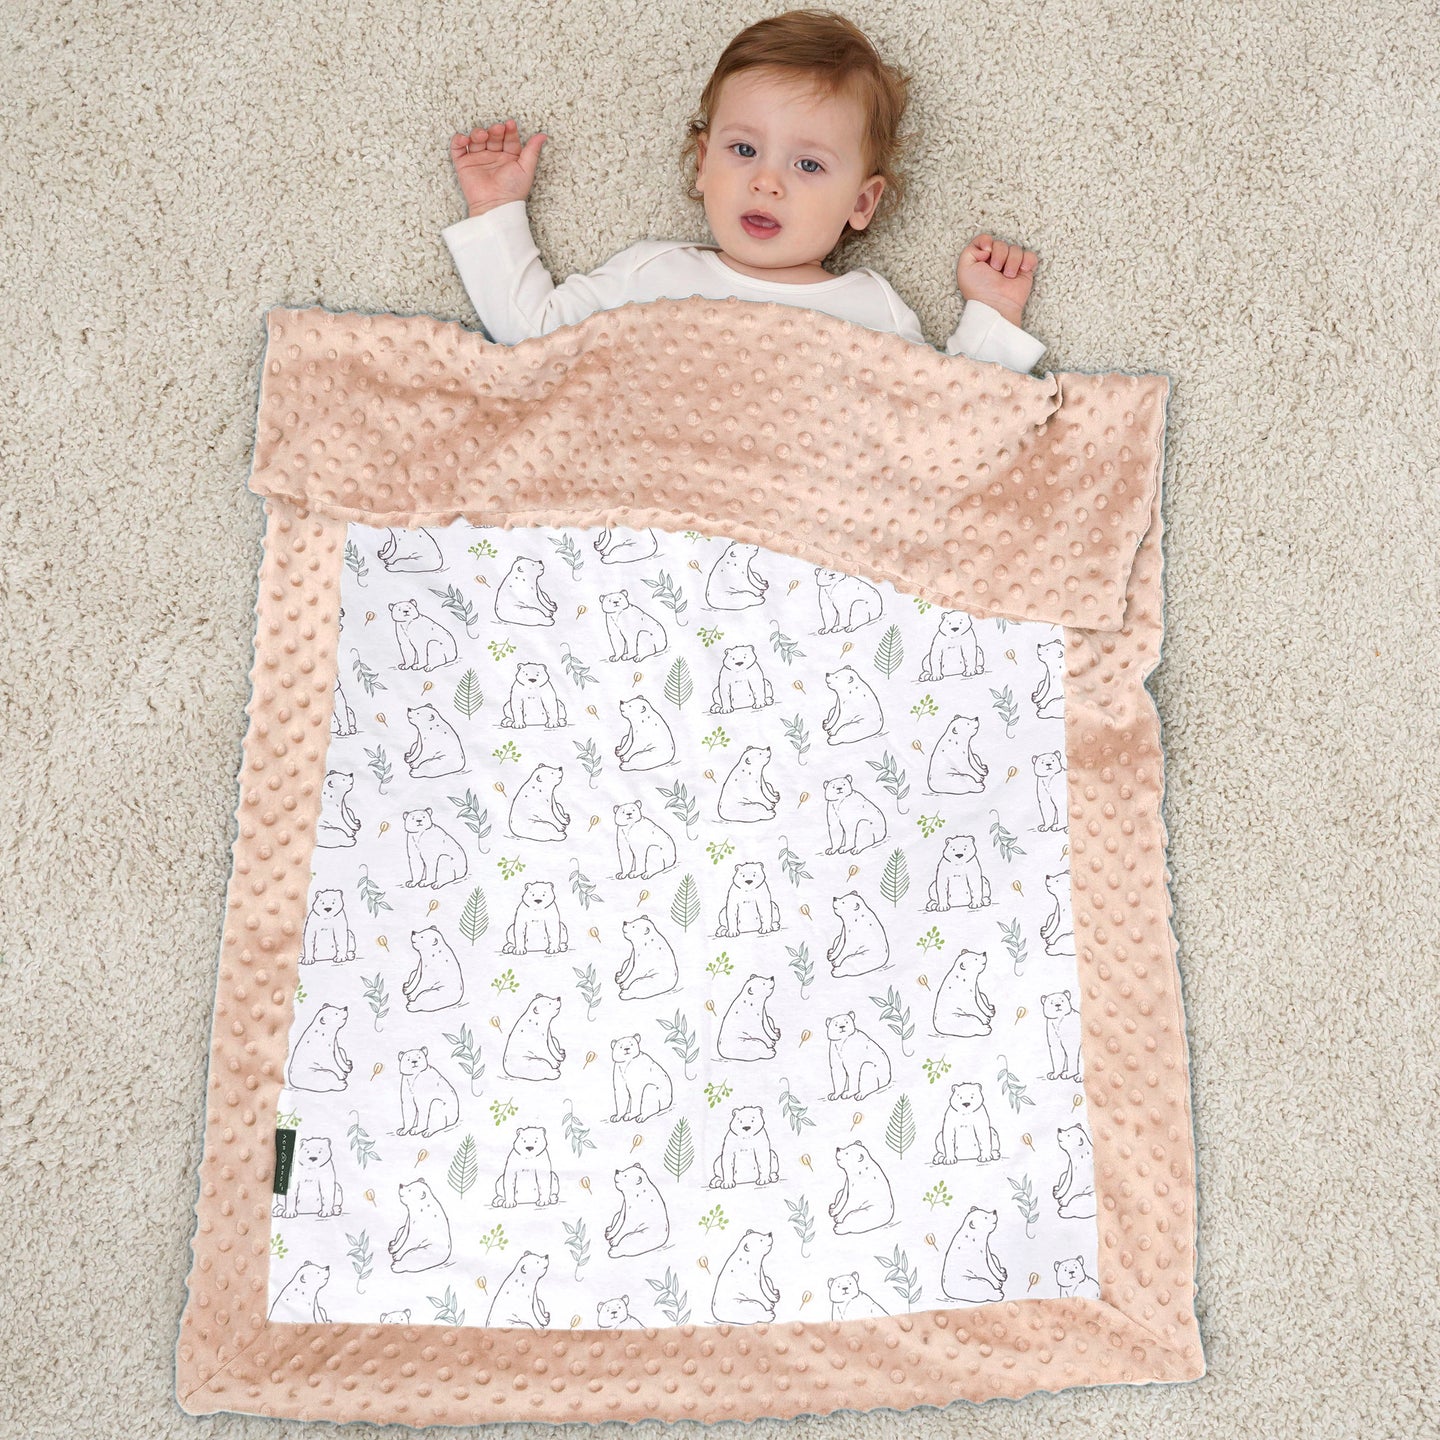 ACRABROS Baby Blankets Double Layer Dotted Backing 30X40 Inches,Linear Polar Bears